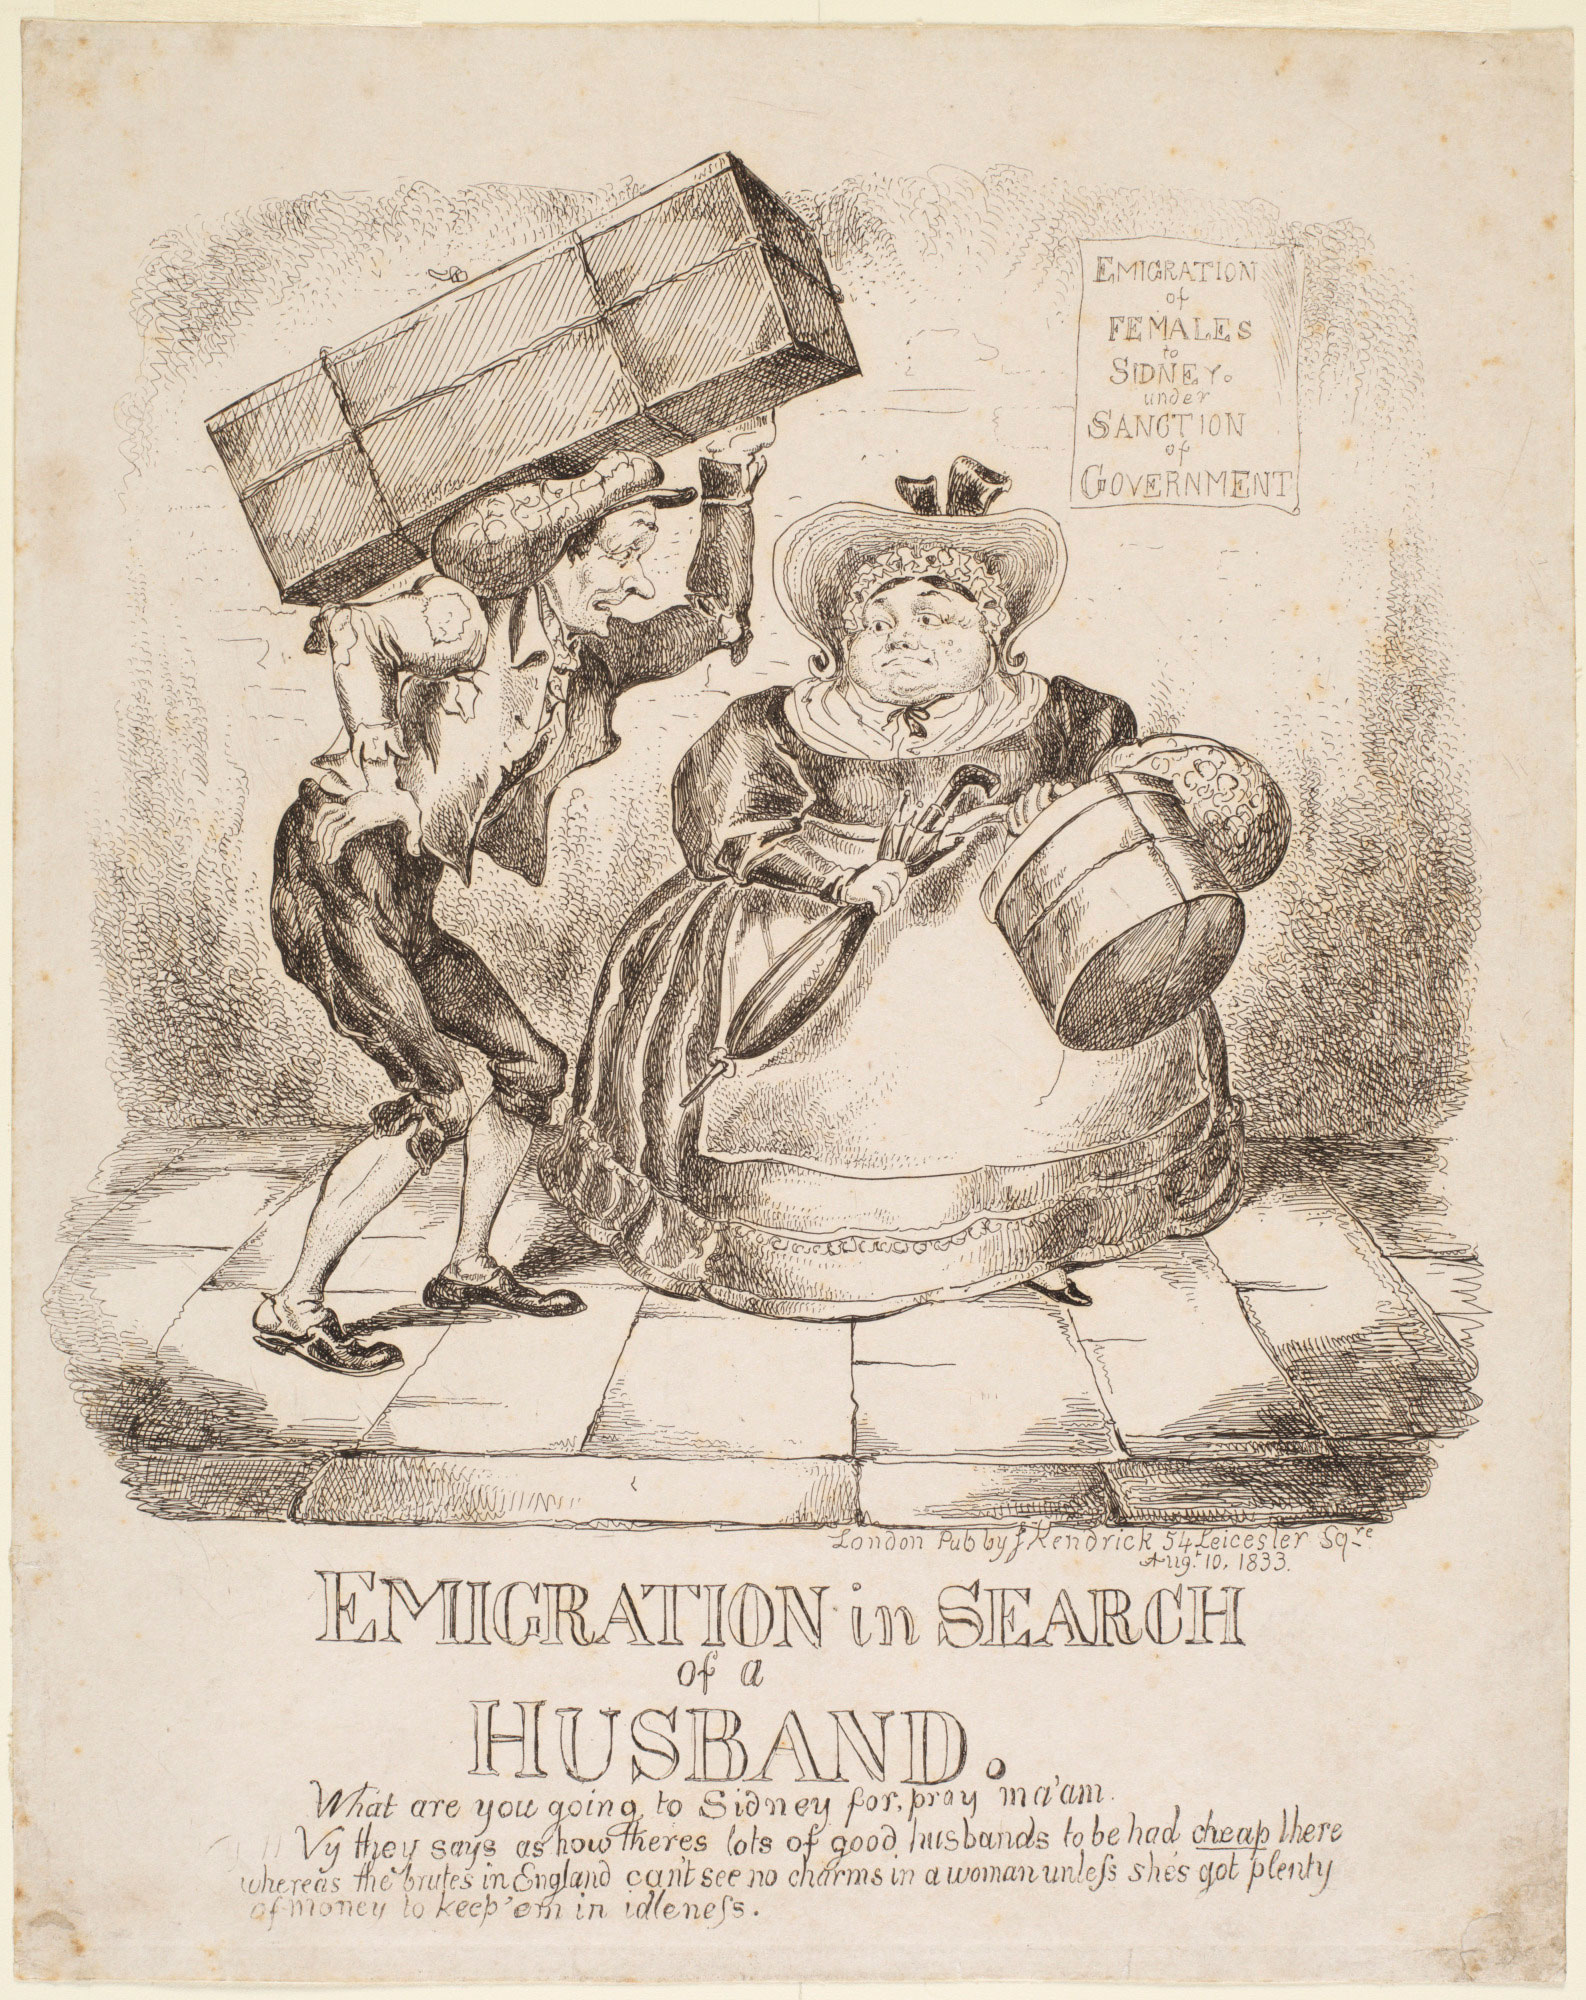 Emigration in Search of a Husband, by J Kendrick, 1833